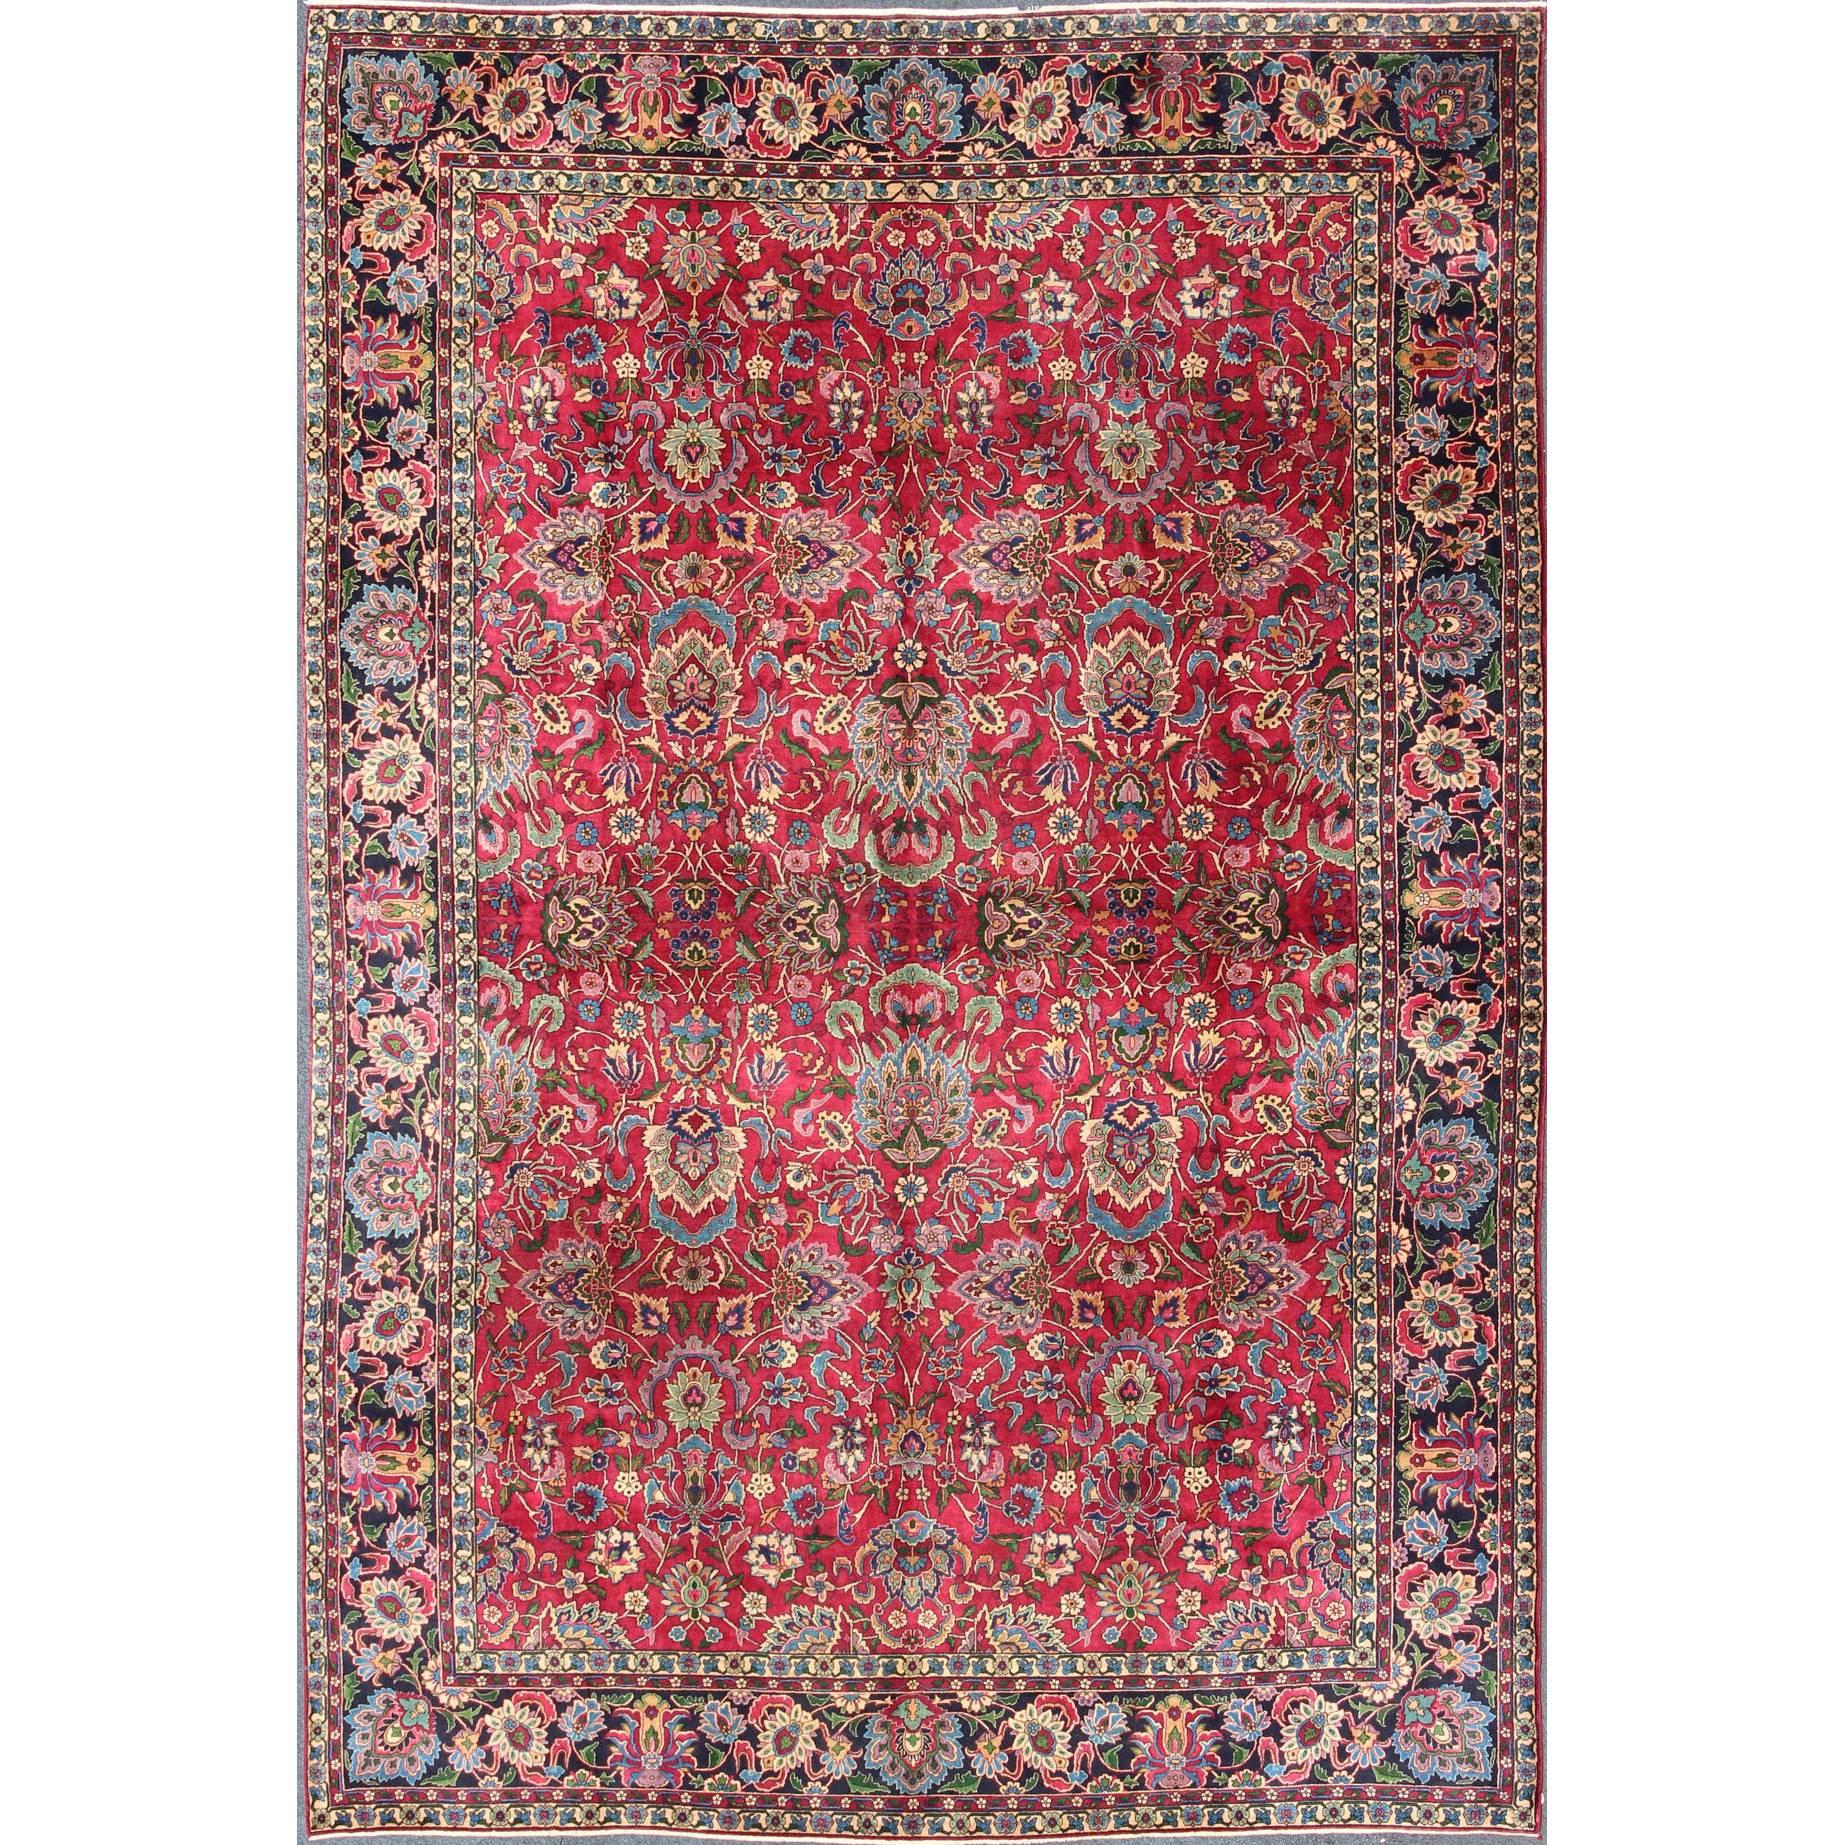 Antique Indian Agra Carpet with Raspberry Color and Fine Shinny Wool